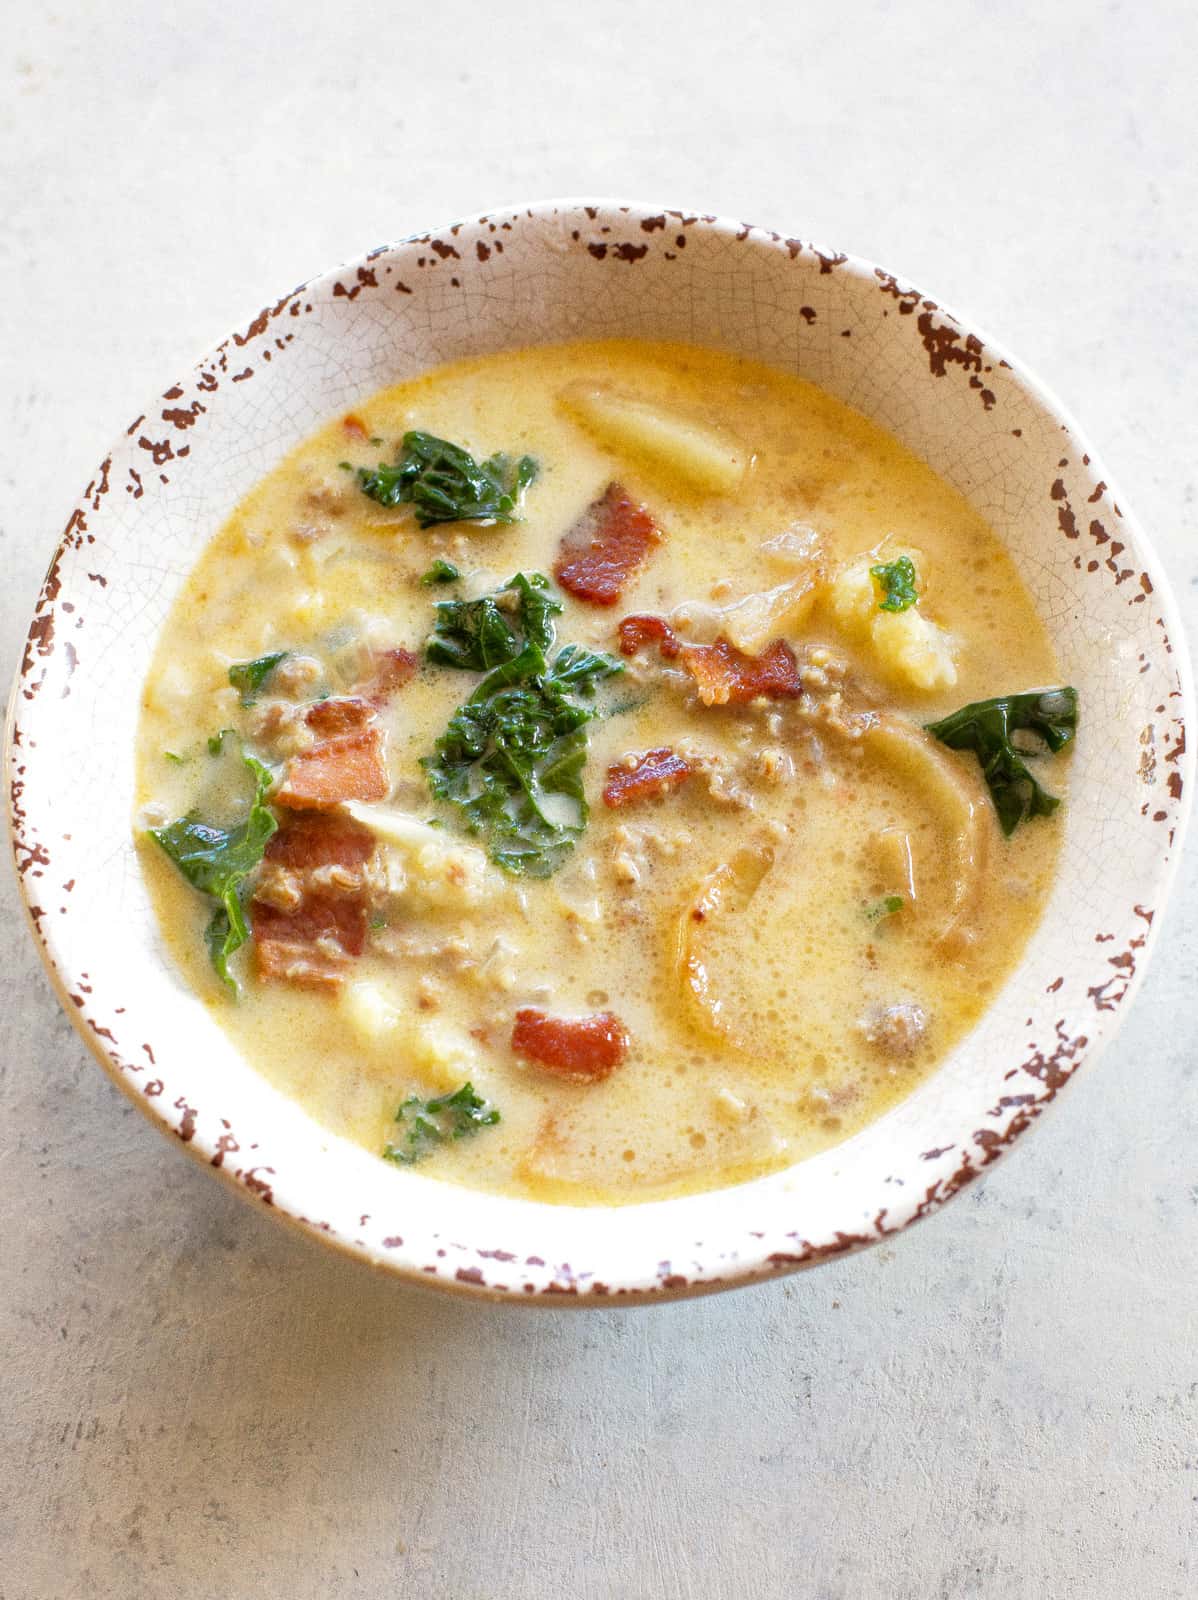 Zuppa Toscana Soup Recipe (+VIDEO) - The Girl Who Ate Everything